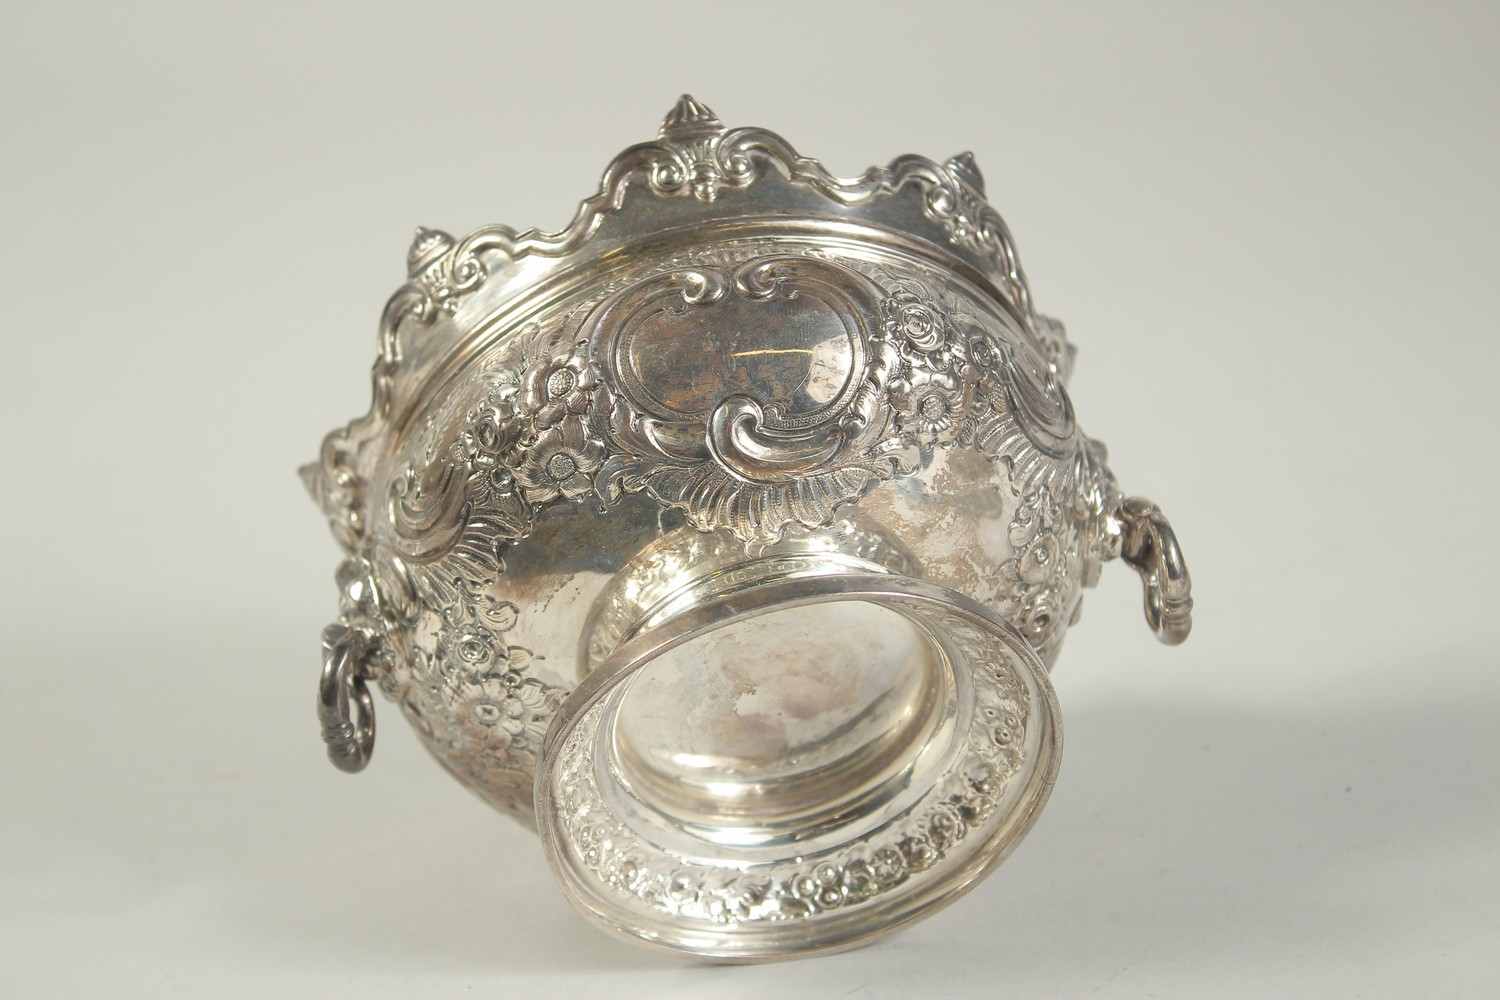 A GOOD SMALL SILVER MONTEITH BOX with repousse decoration and lion ring handles. 5.25ins diameter. - Image 6 of 7